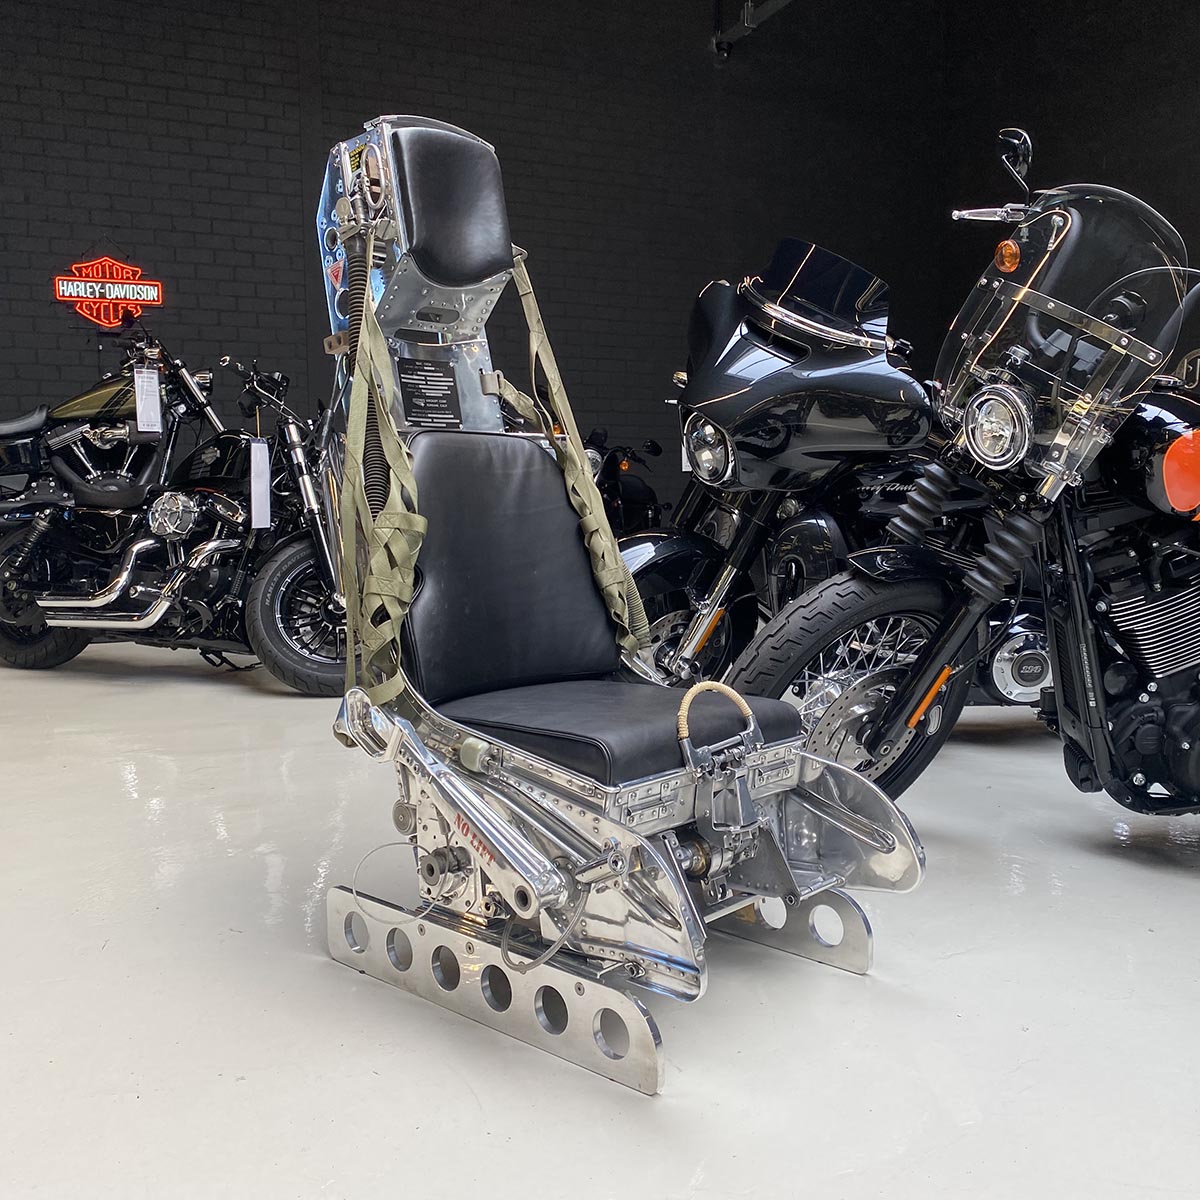 Mirror polished Lockheed C2 ejection seat from a Starfighter in front of a number of Harley-Davidson bikes.